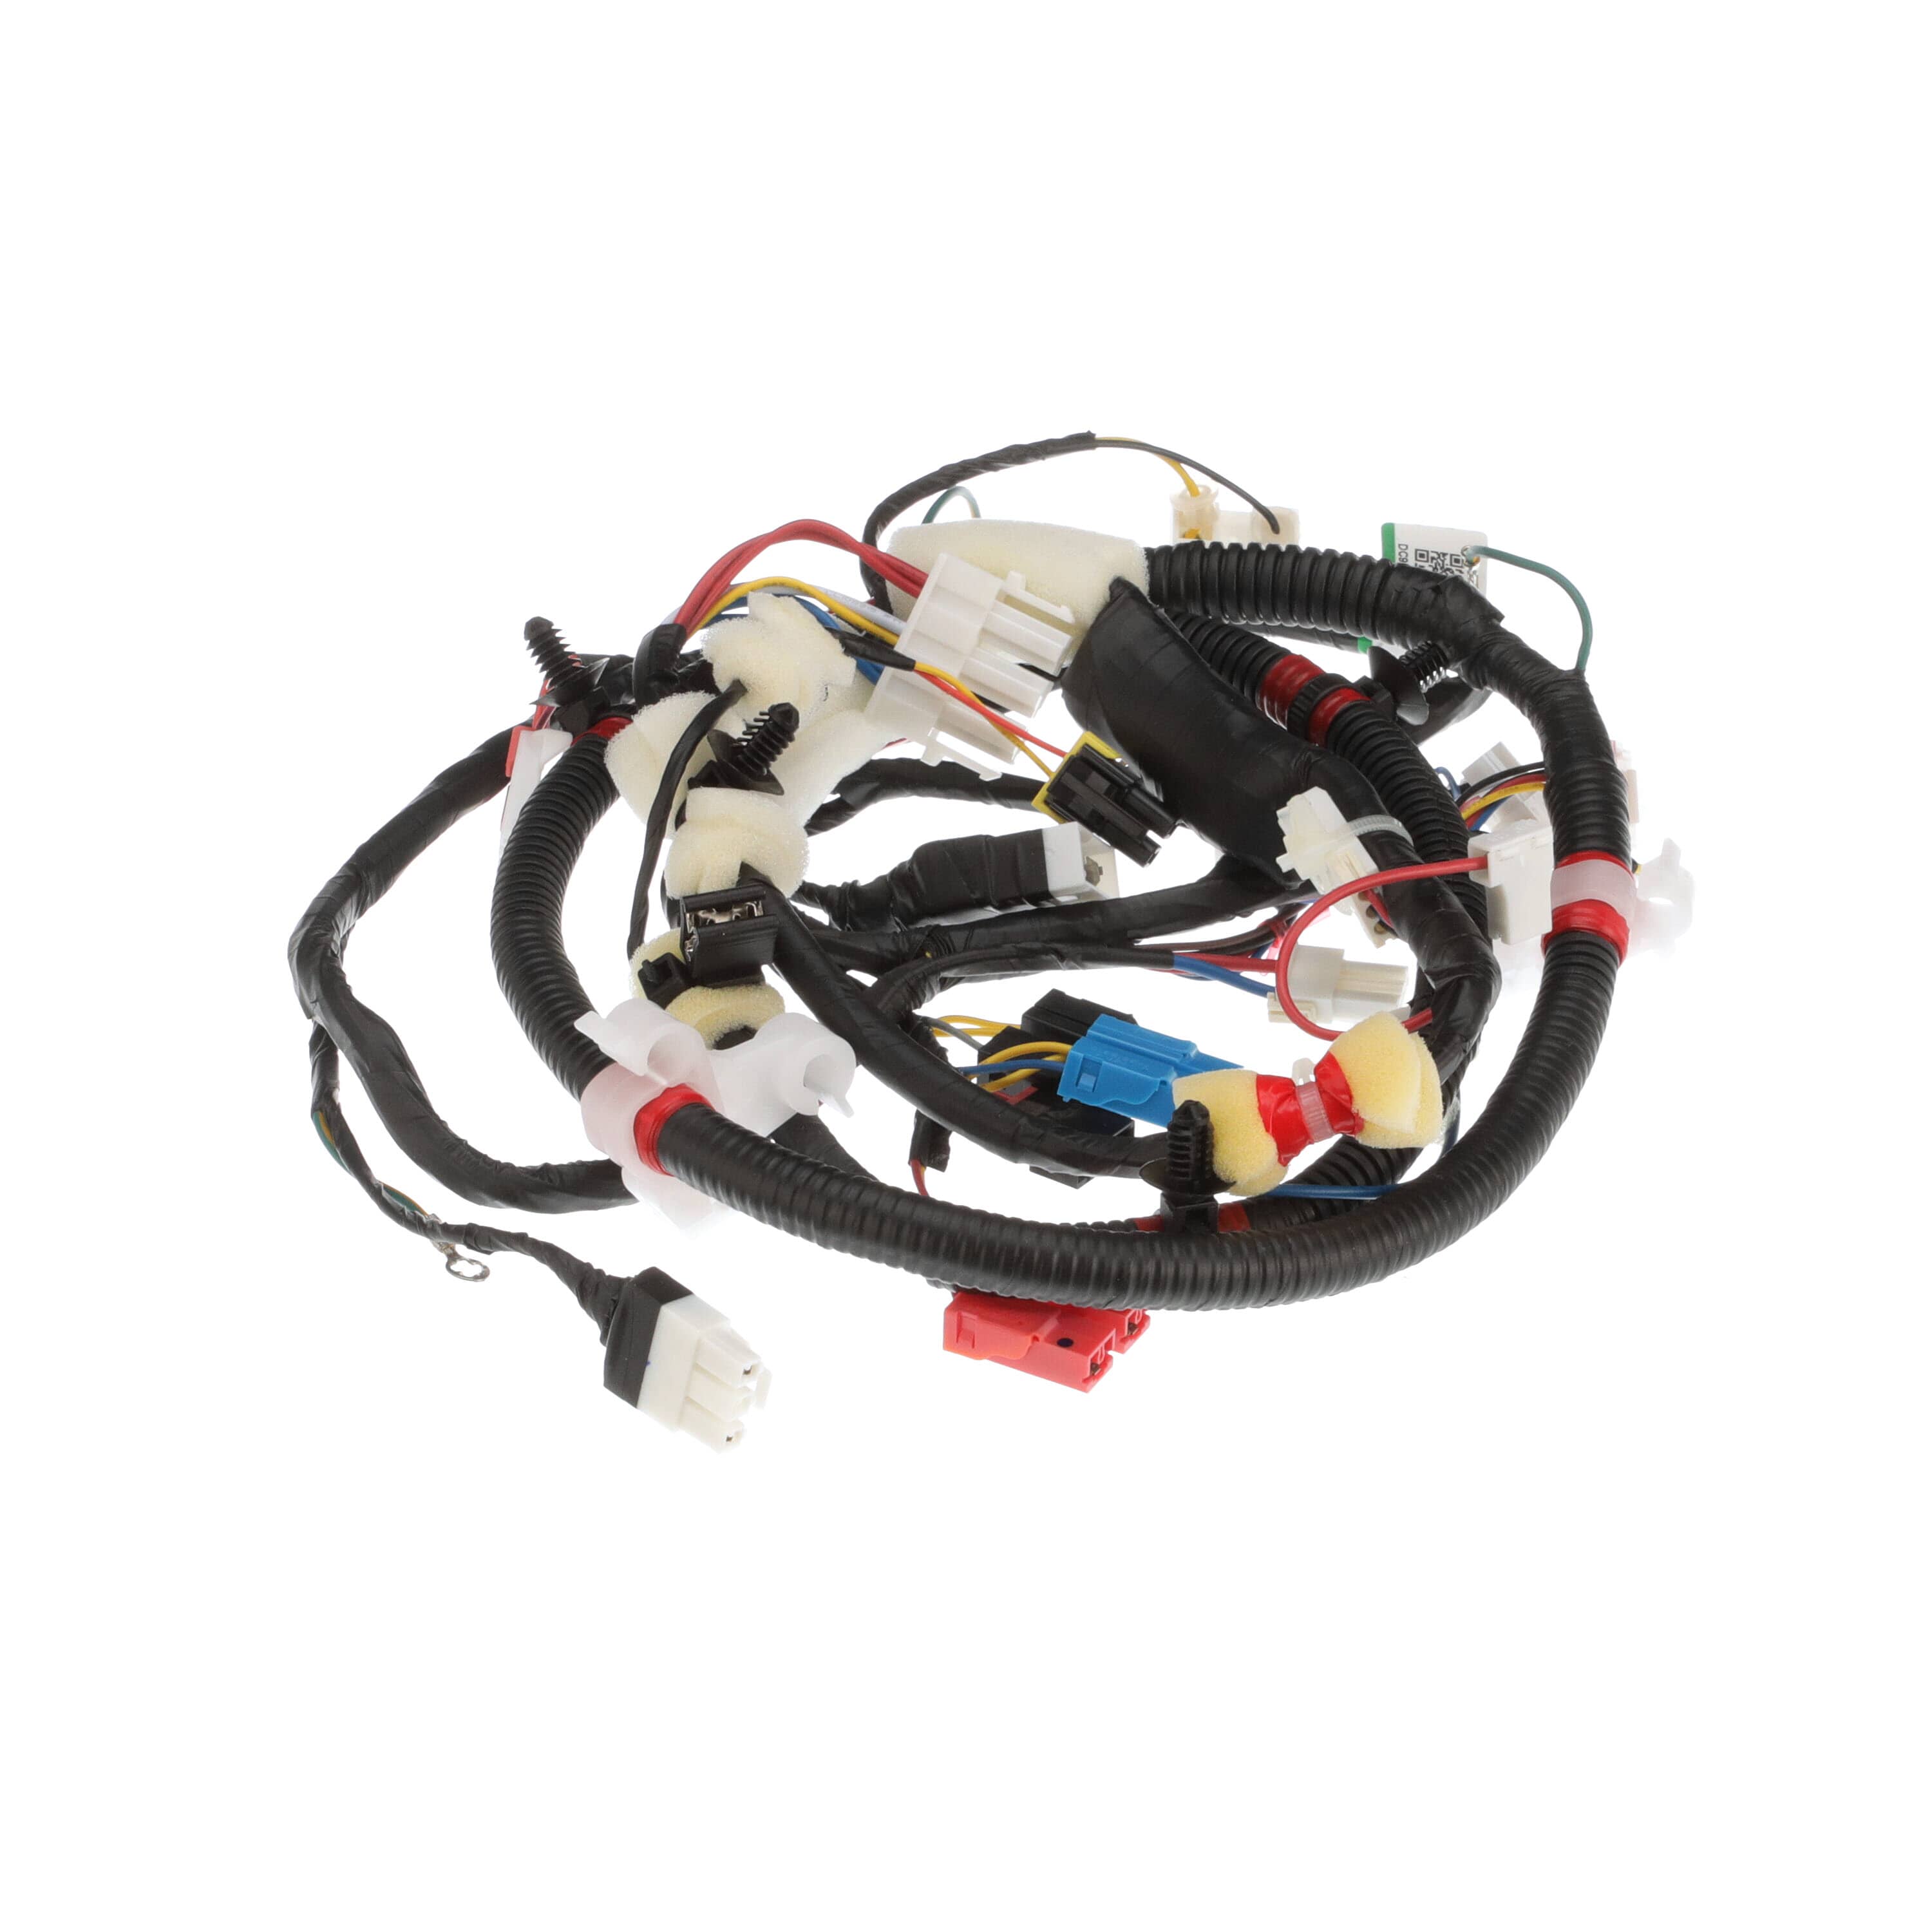 Samsung DC93-00702A Washer Wire Harness